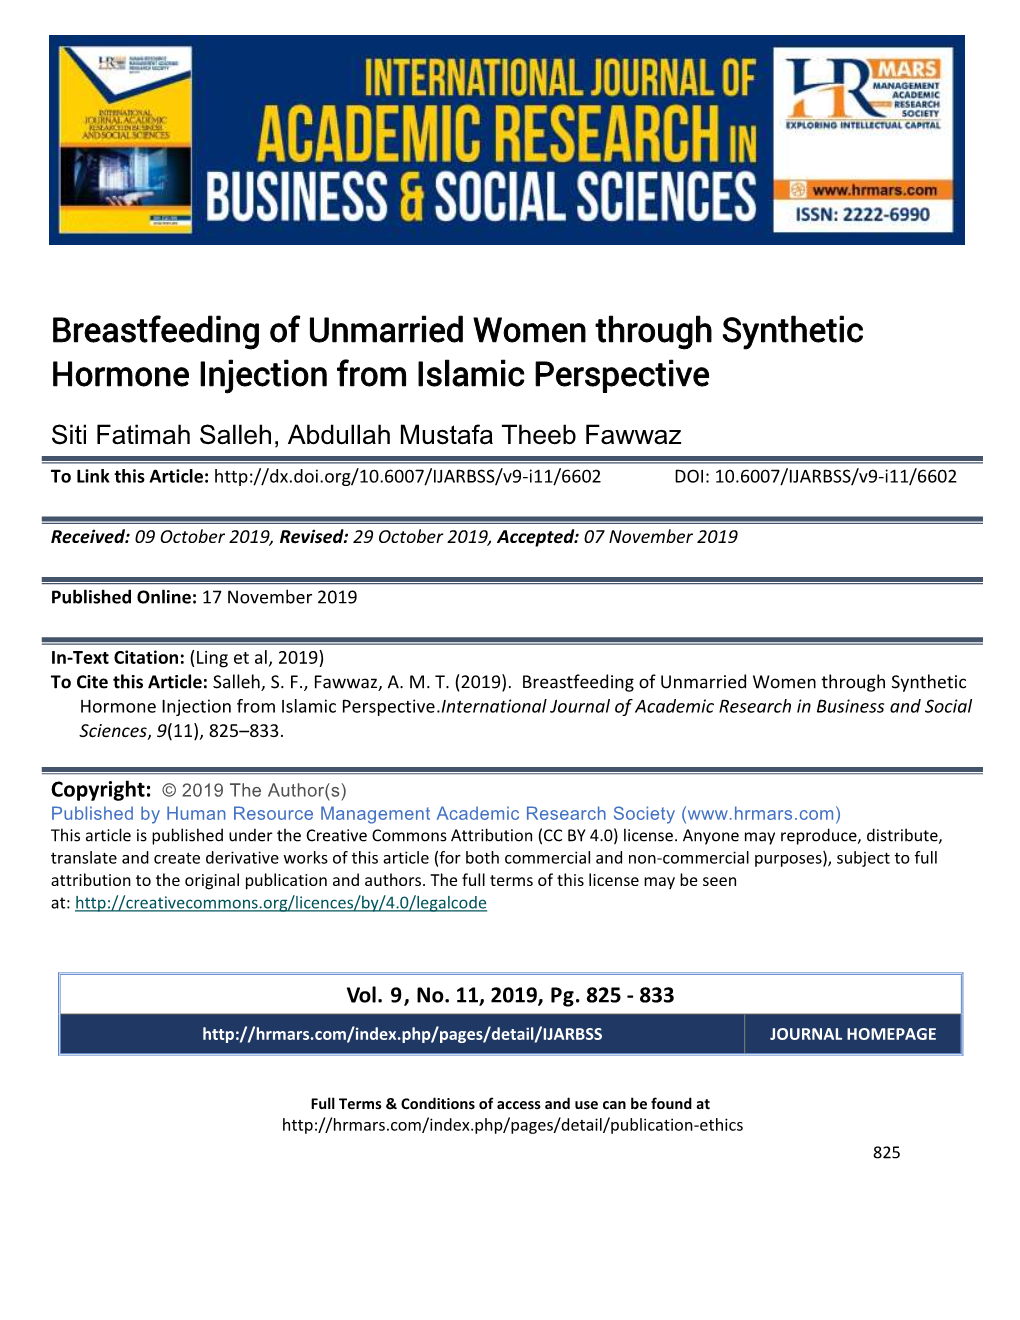 Breastfeeding of Unmarried Women Through Synthetic Hormone Injection from Islamic Perspective